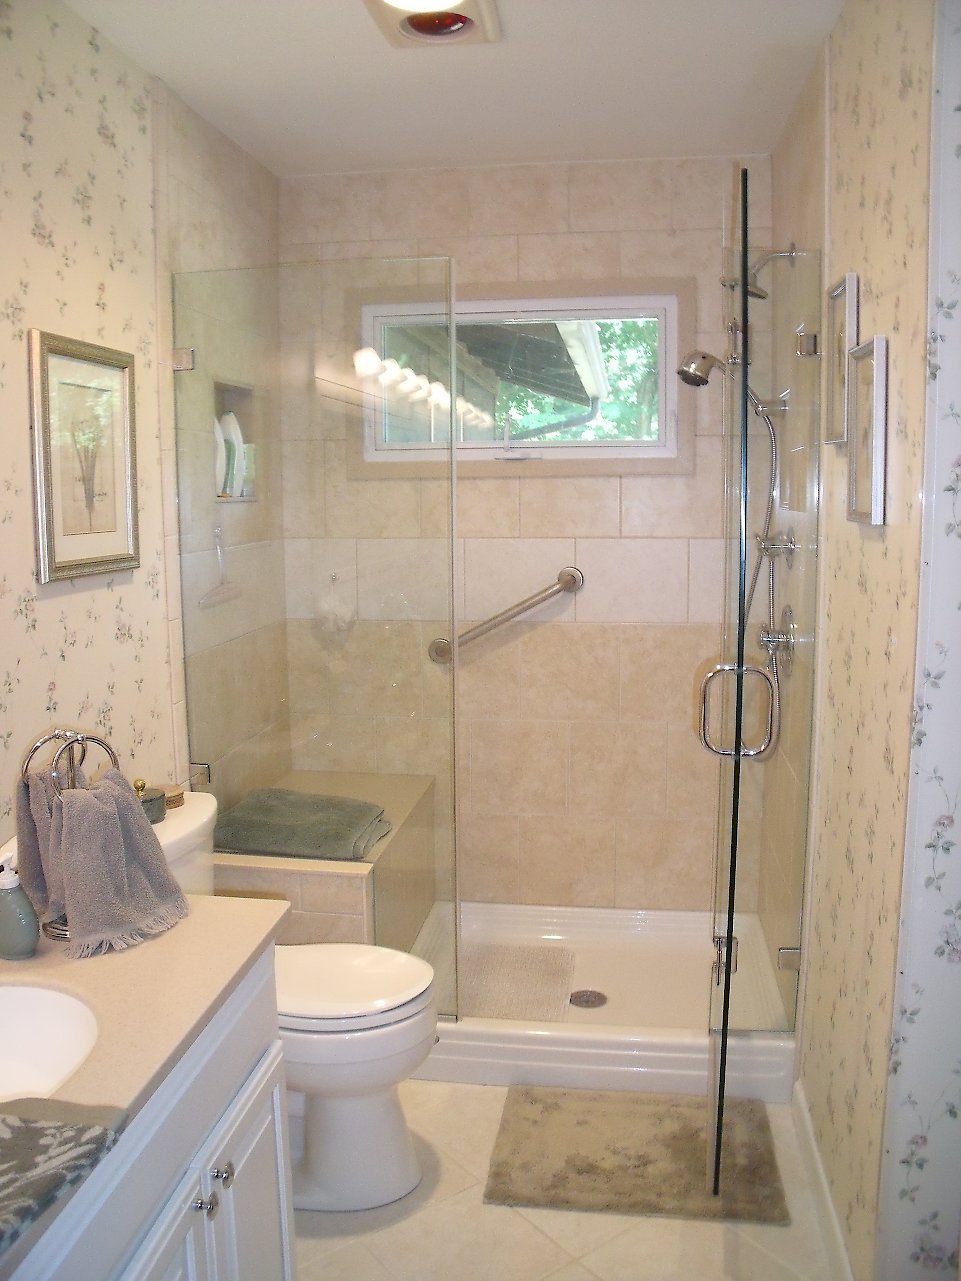 View of the shower with the glass door open.